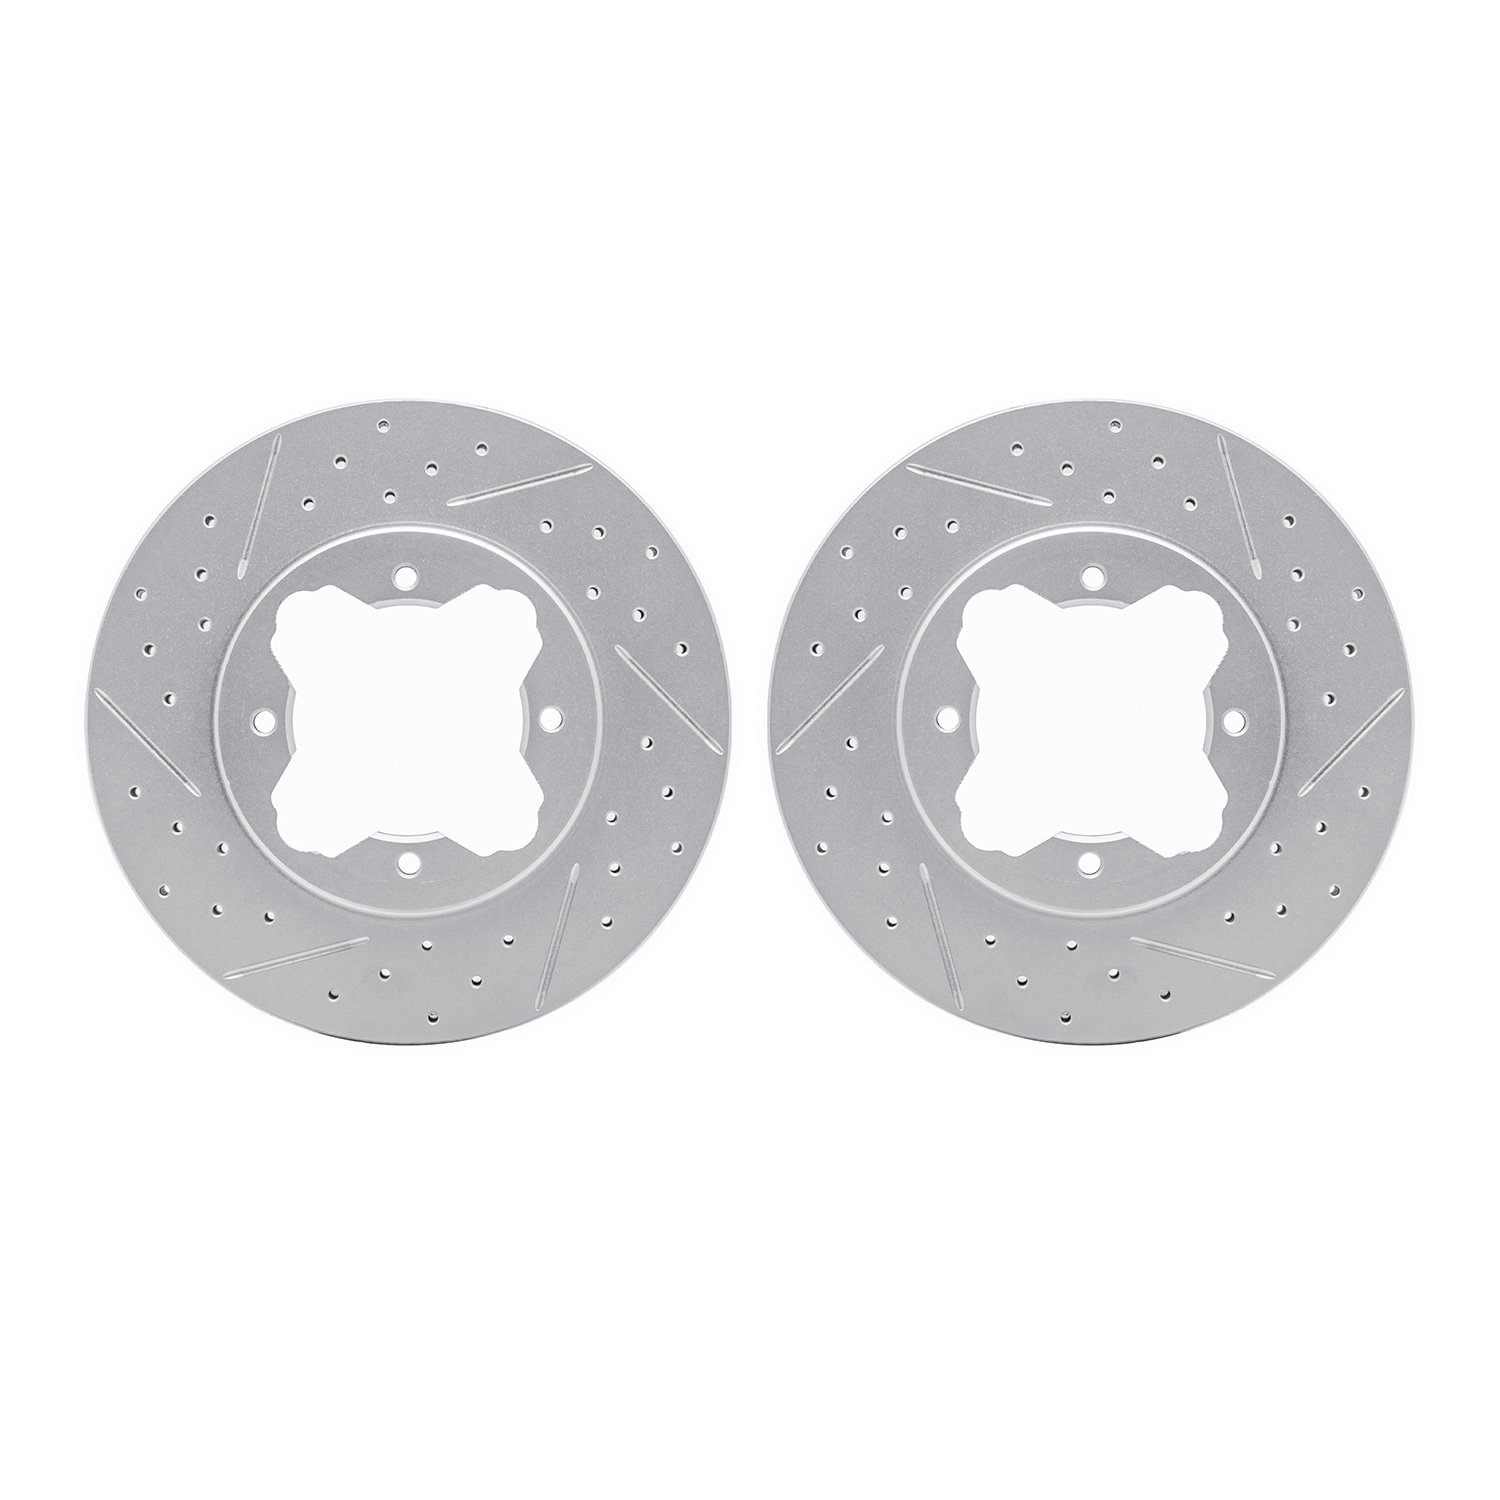 2002-59000 Geoperformance Drilled/Slotted Brake Rotors, 1990-1997 Acura/Honda, Position: Front